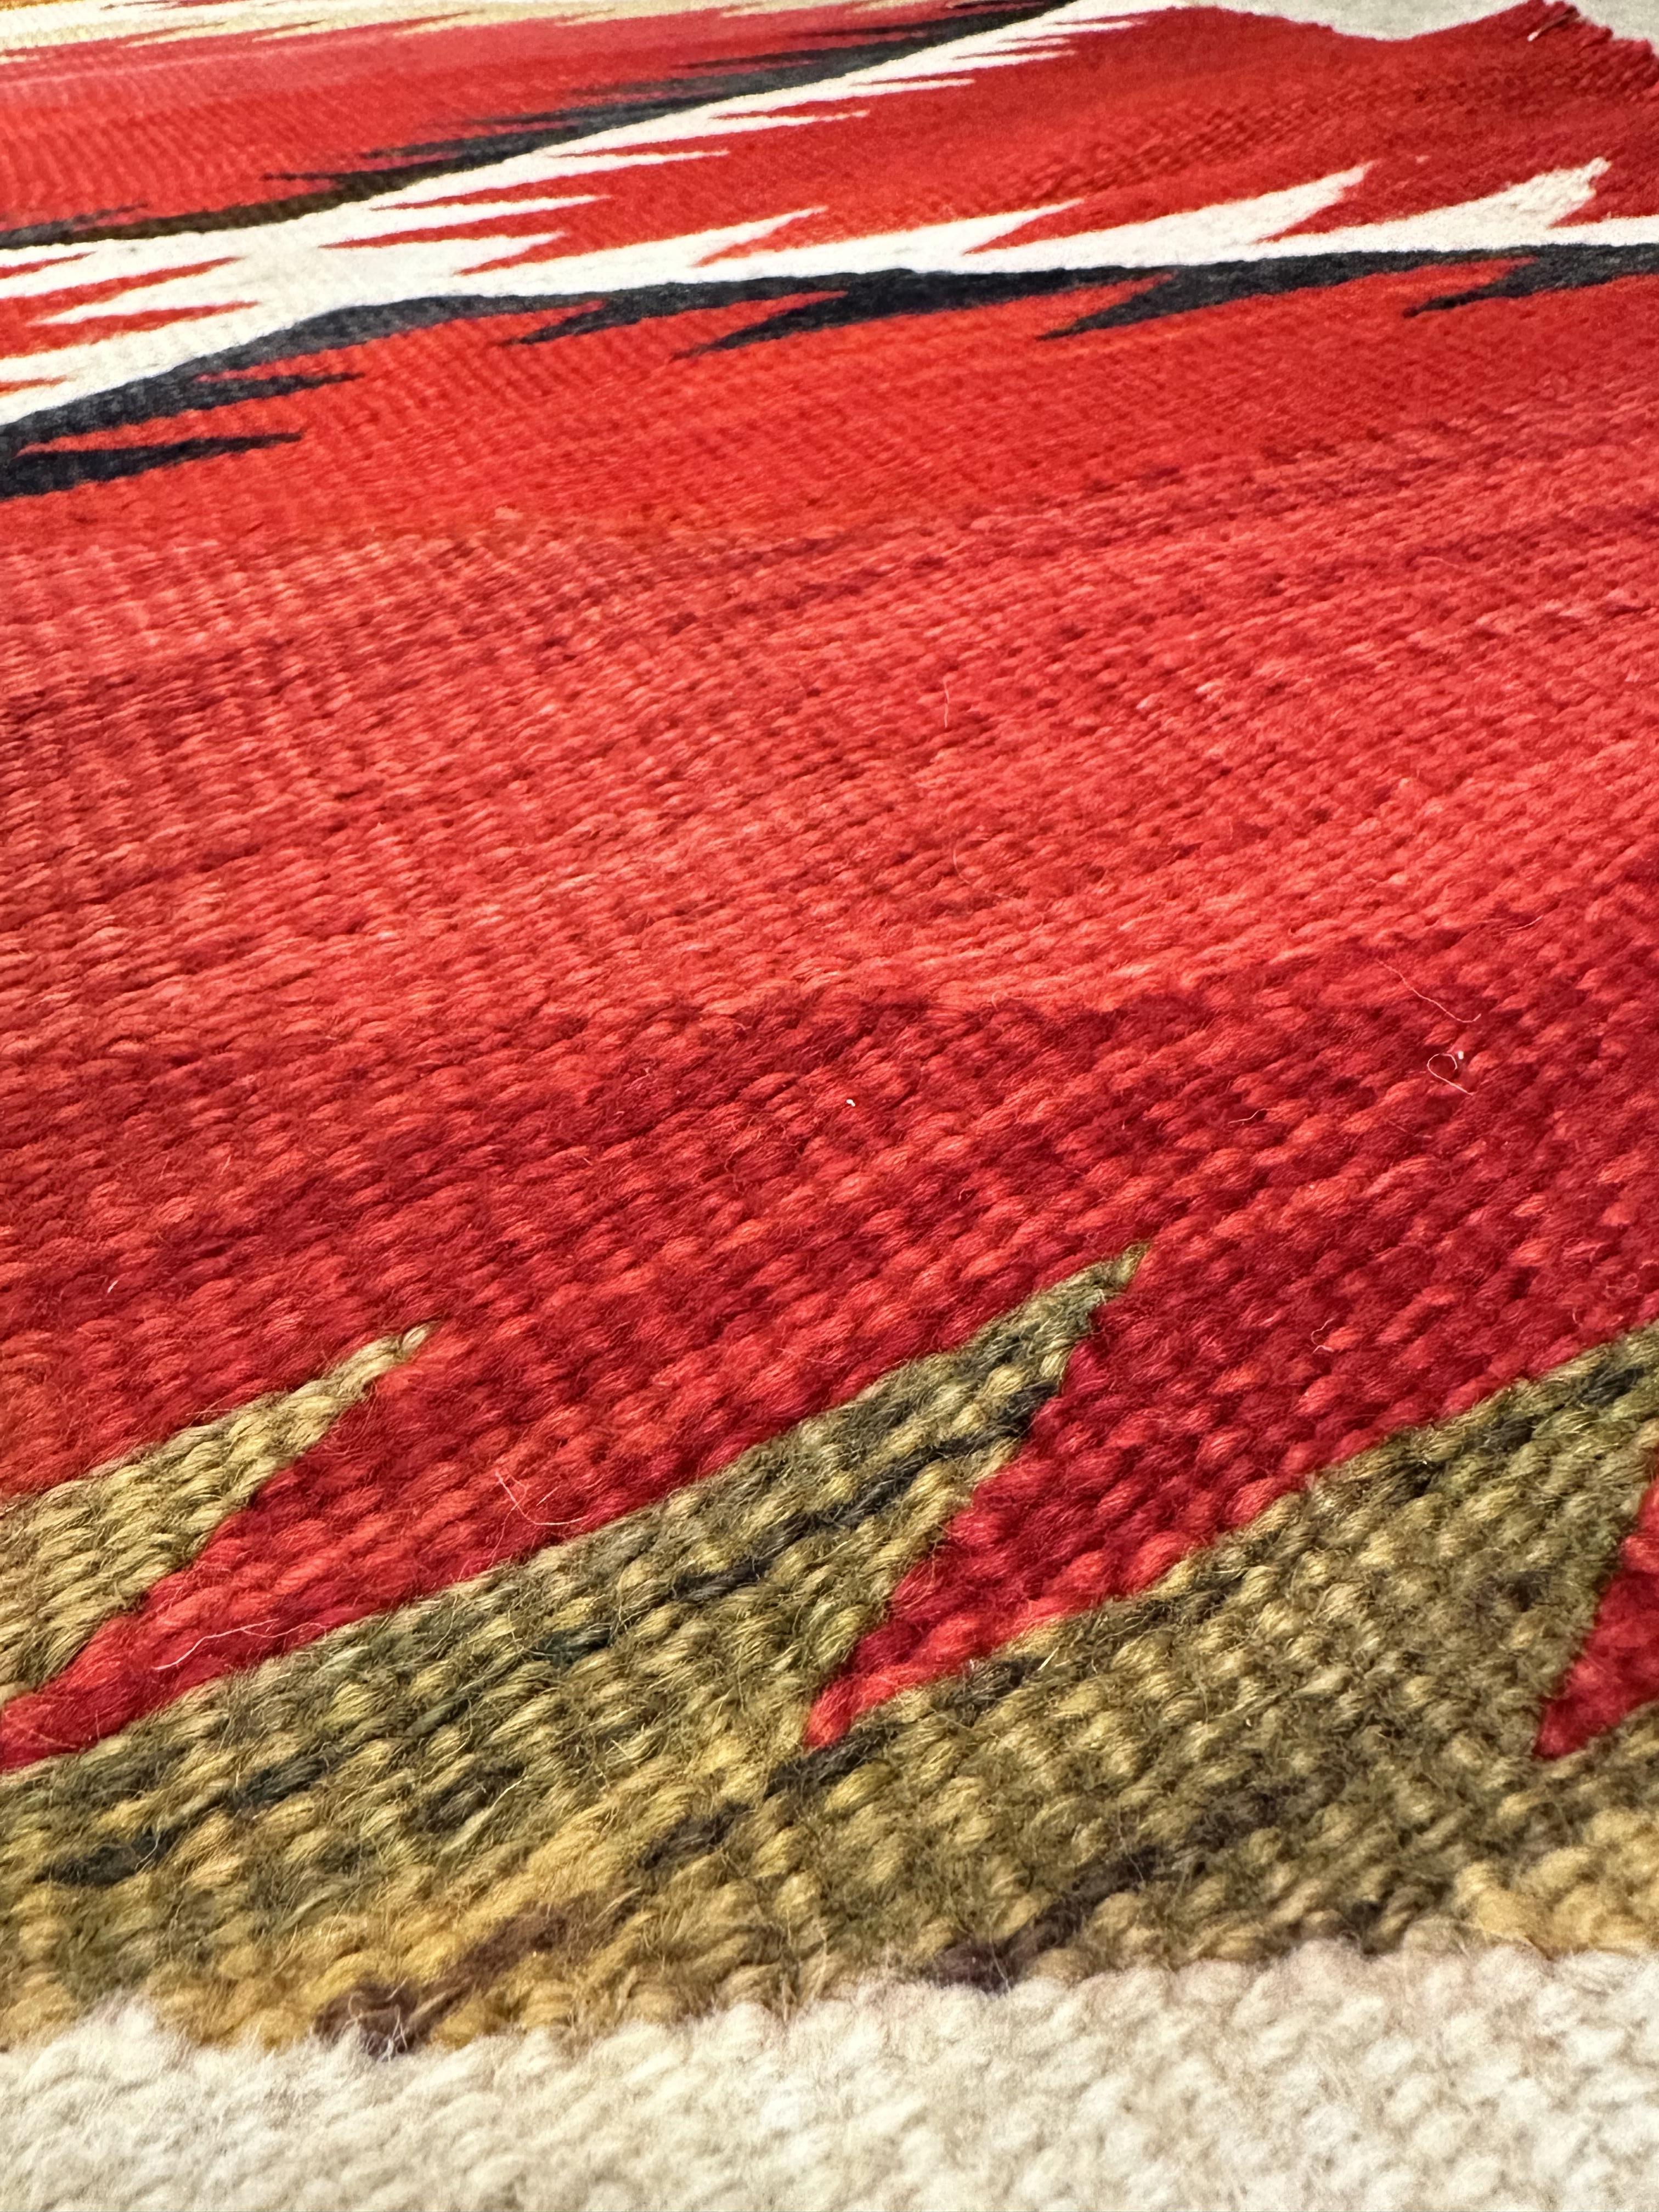 Antique Navajo Carpet, Folk Rug, Handmade Wool, Red, Black, White, Green In Good Condition For Sale In Port Washington, NY